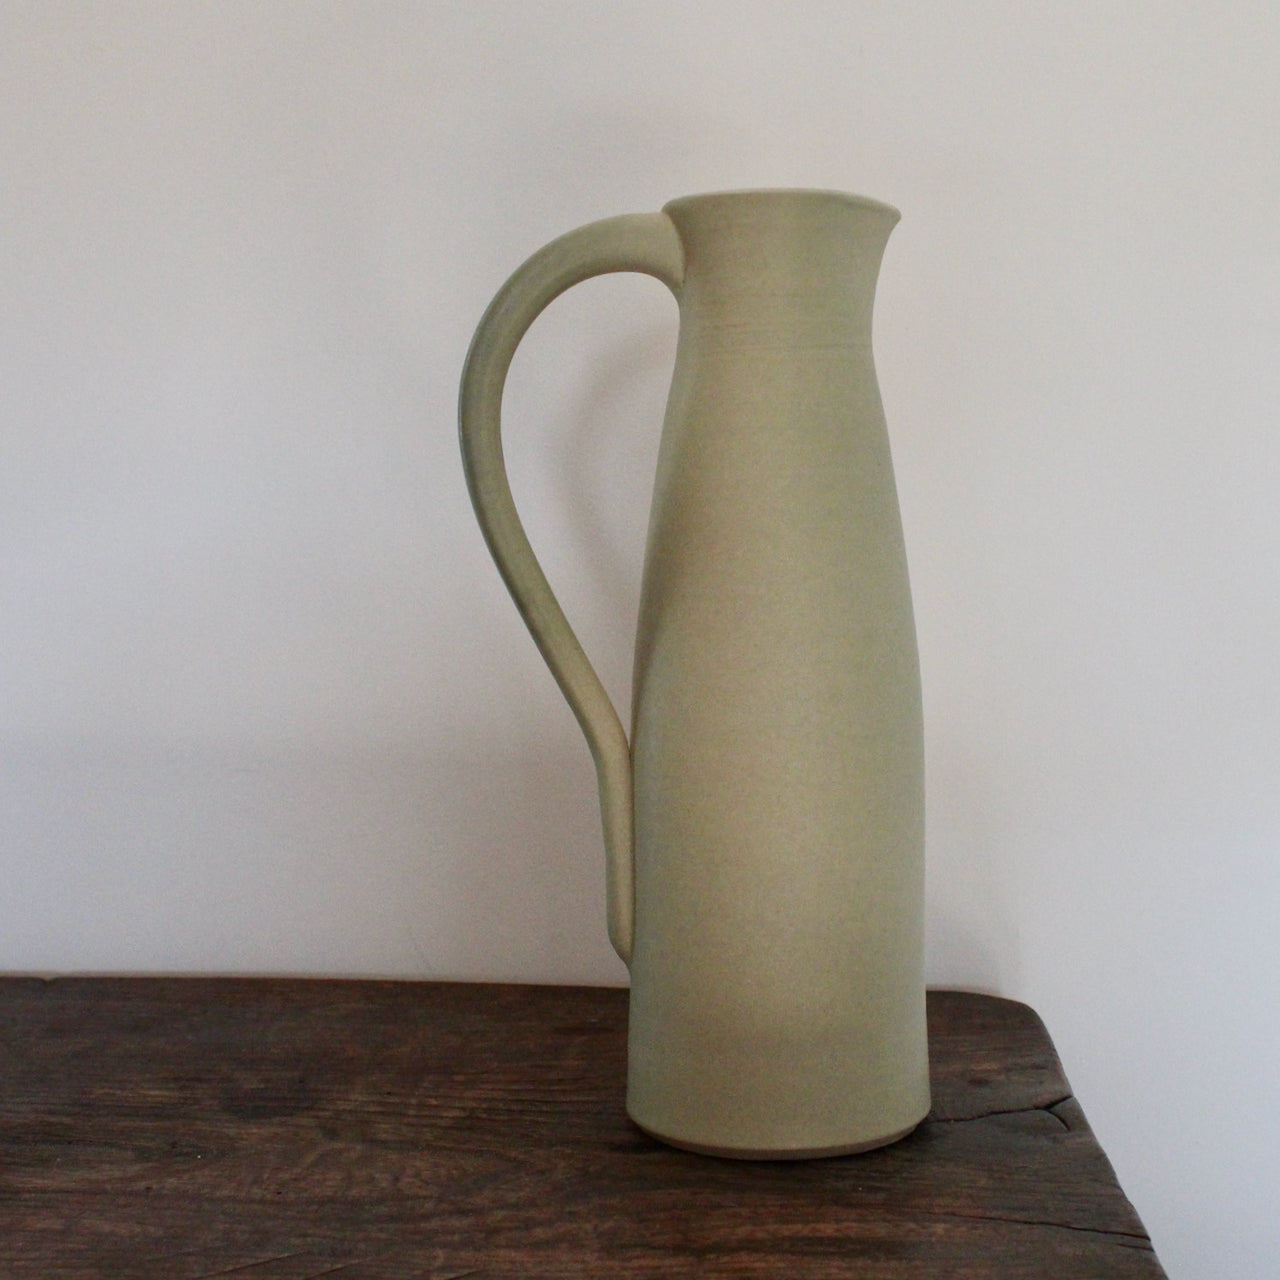 a pale olive ceramic jug by UK ceramicist Lucy Burley.